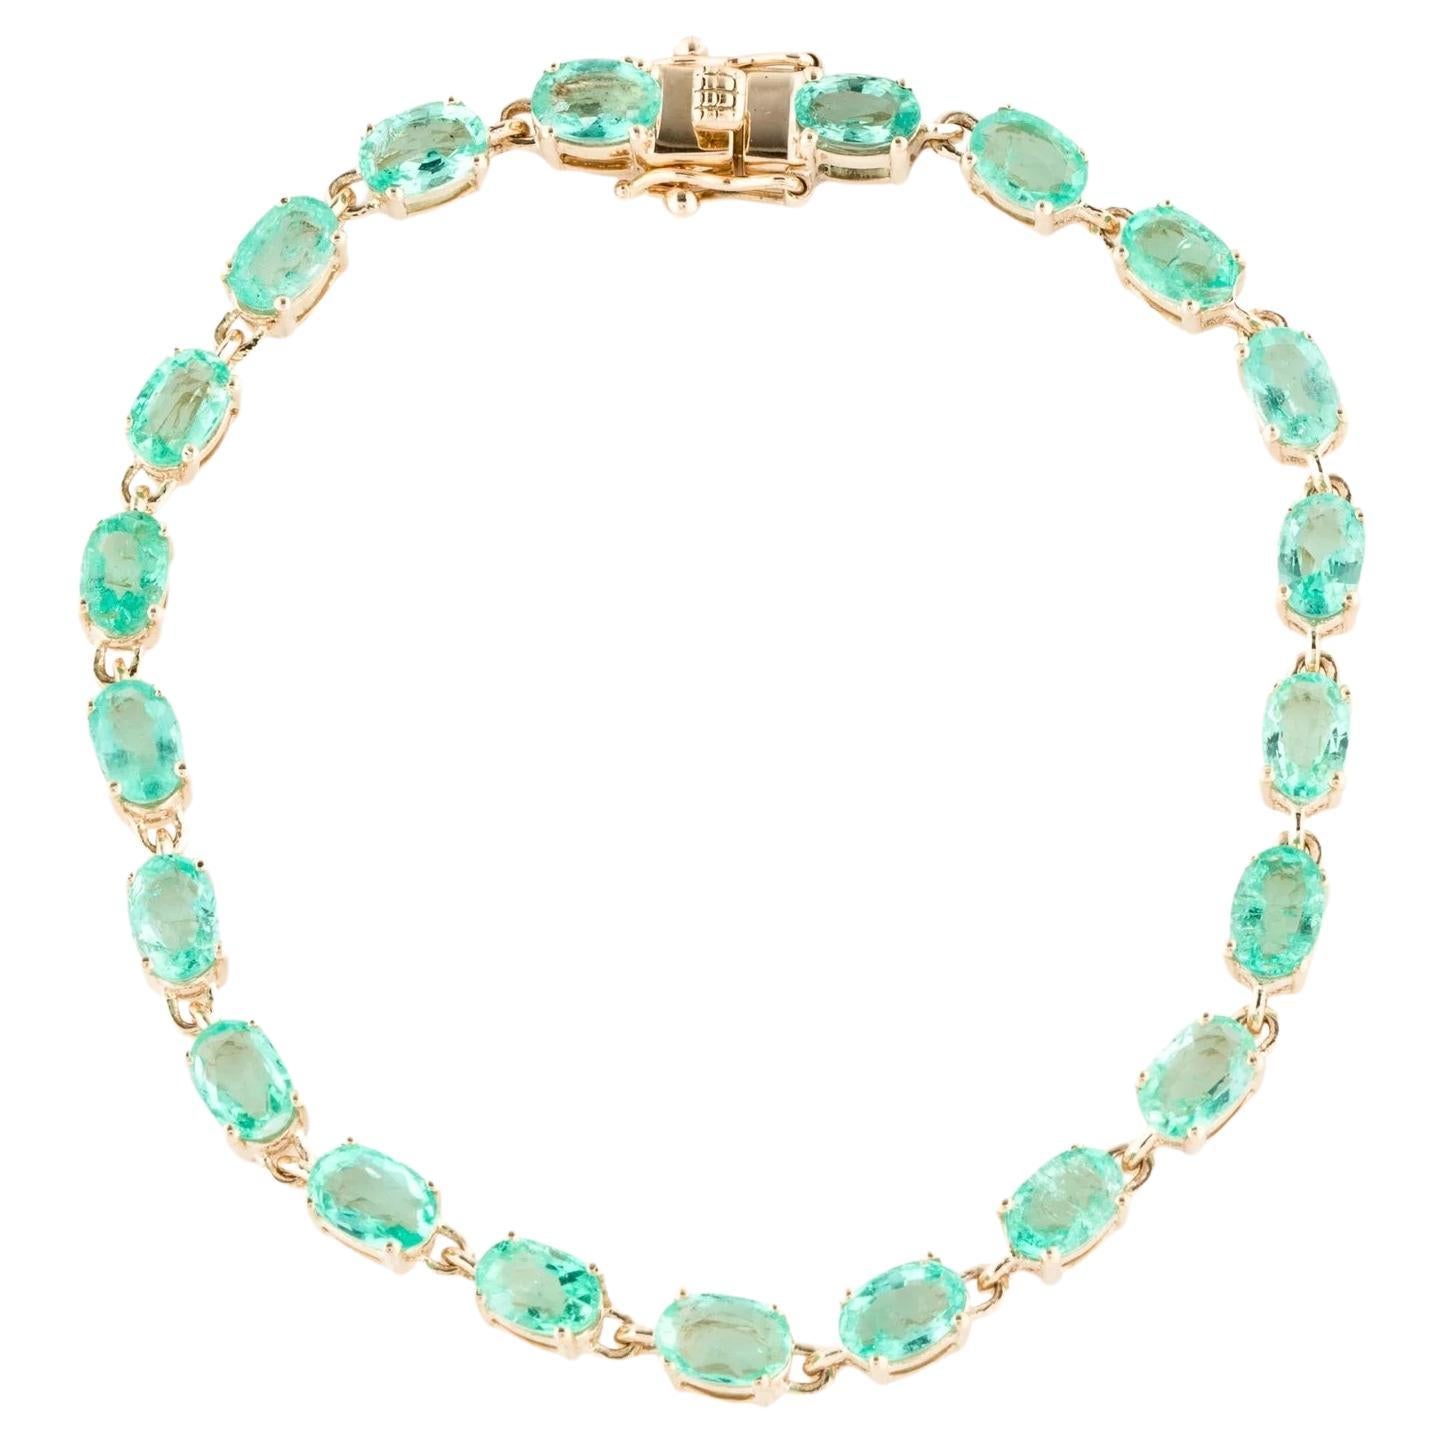 14K 9.62ctw Emerald Link Bracelet - Luxurious Faceted Oval Stones For Sale